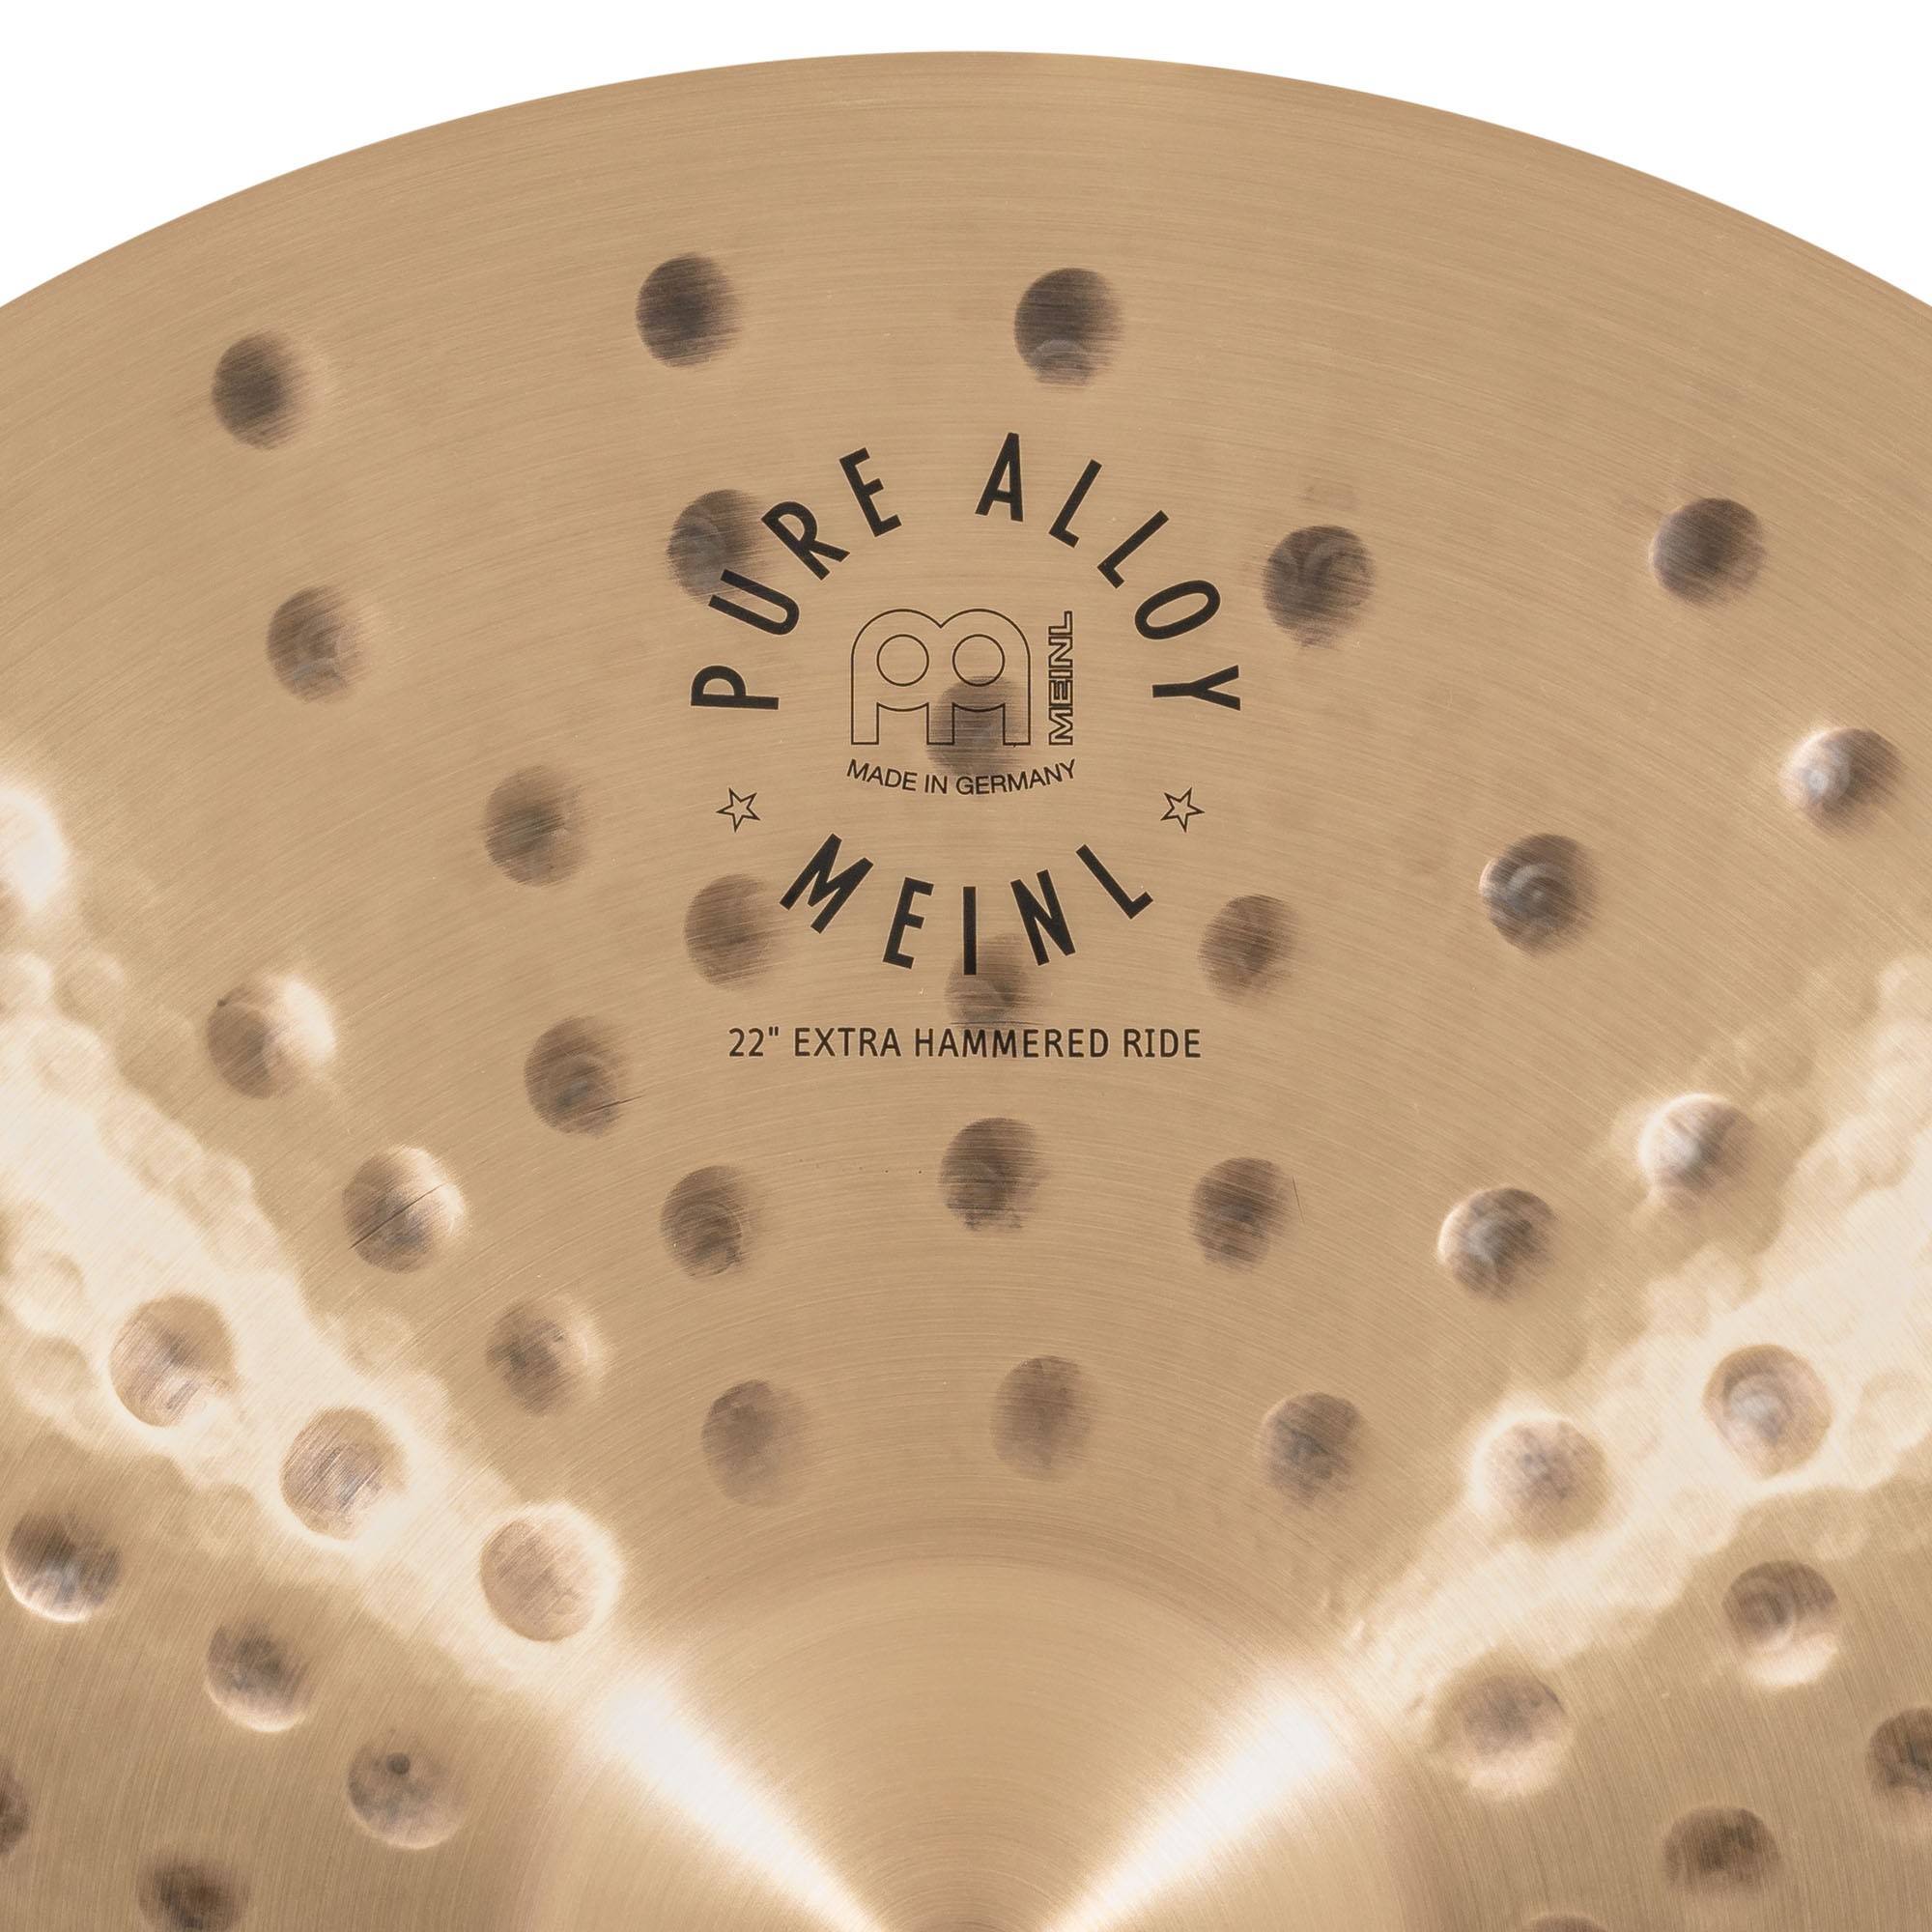 Meinl Pure Alloy 22" Extra Hammered Ride